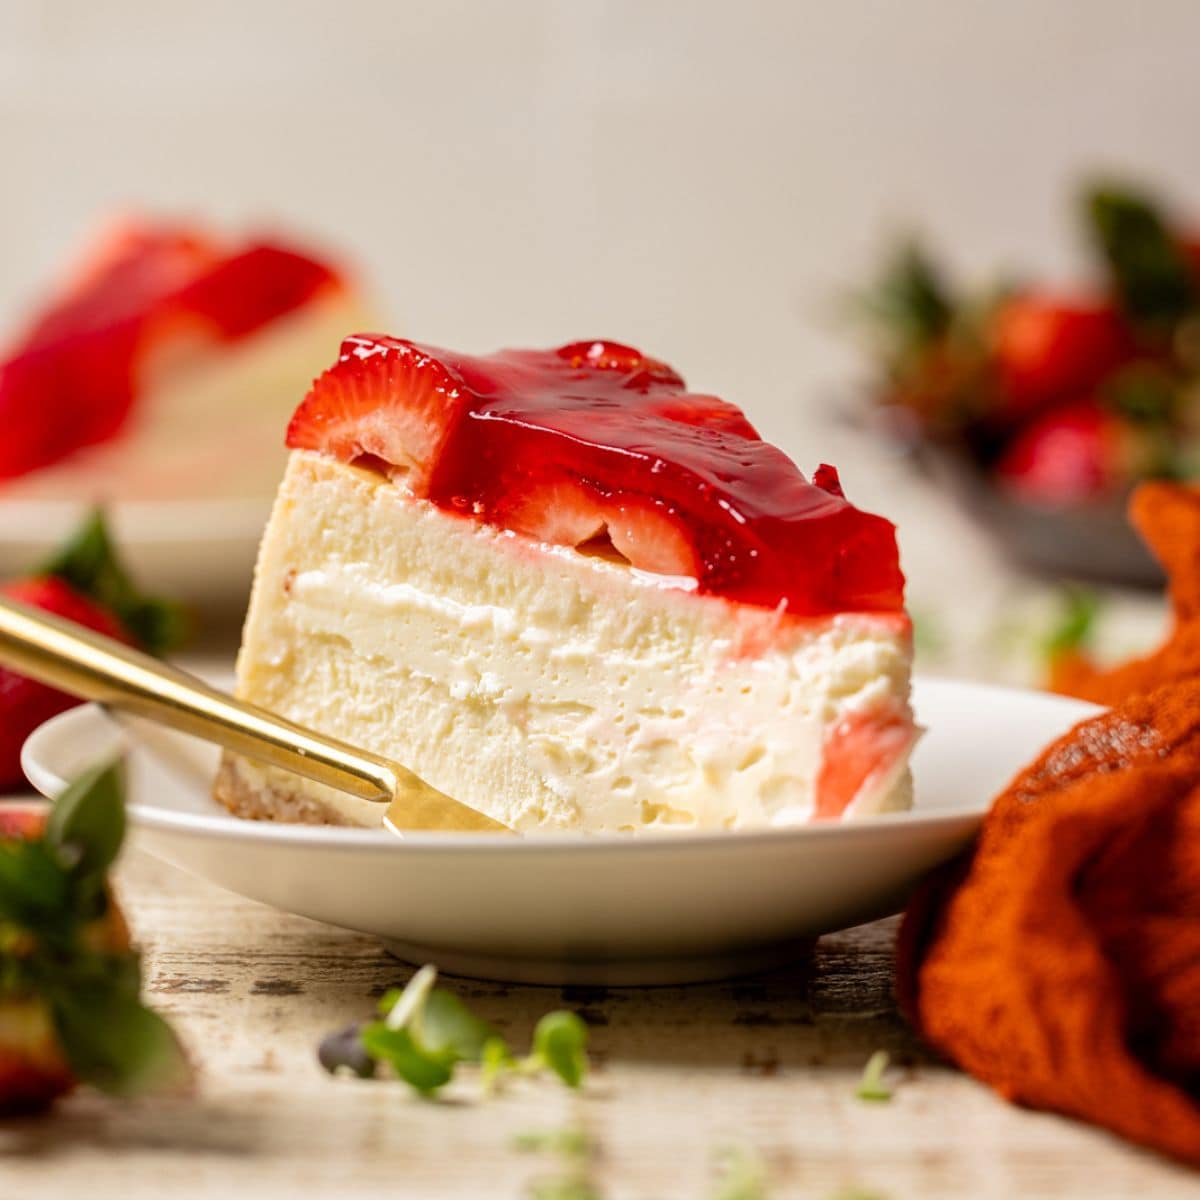 Slice of cheesecake with a fork and strawberries.